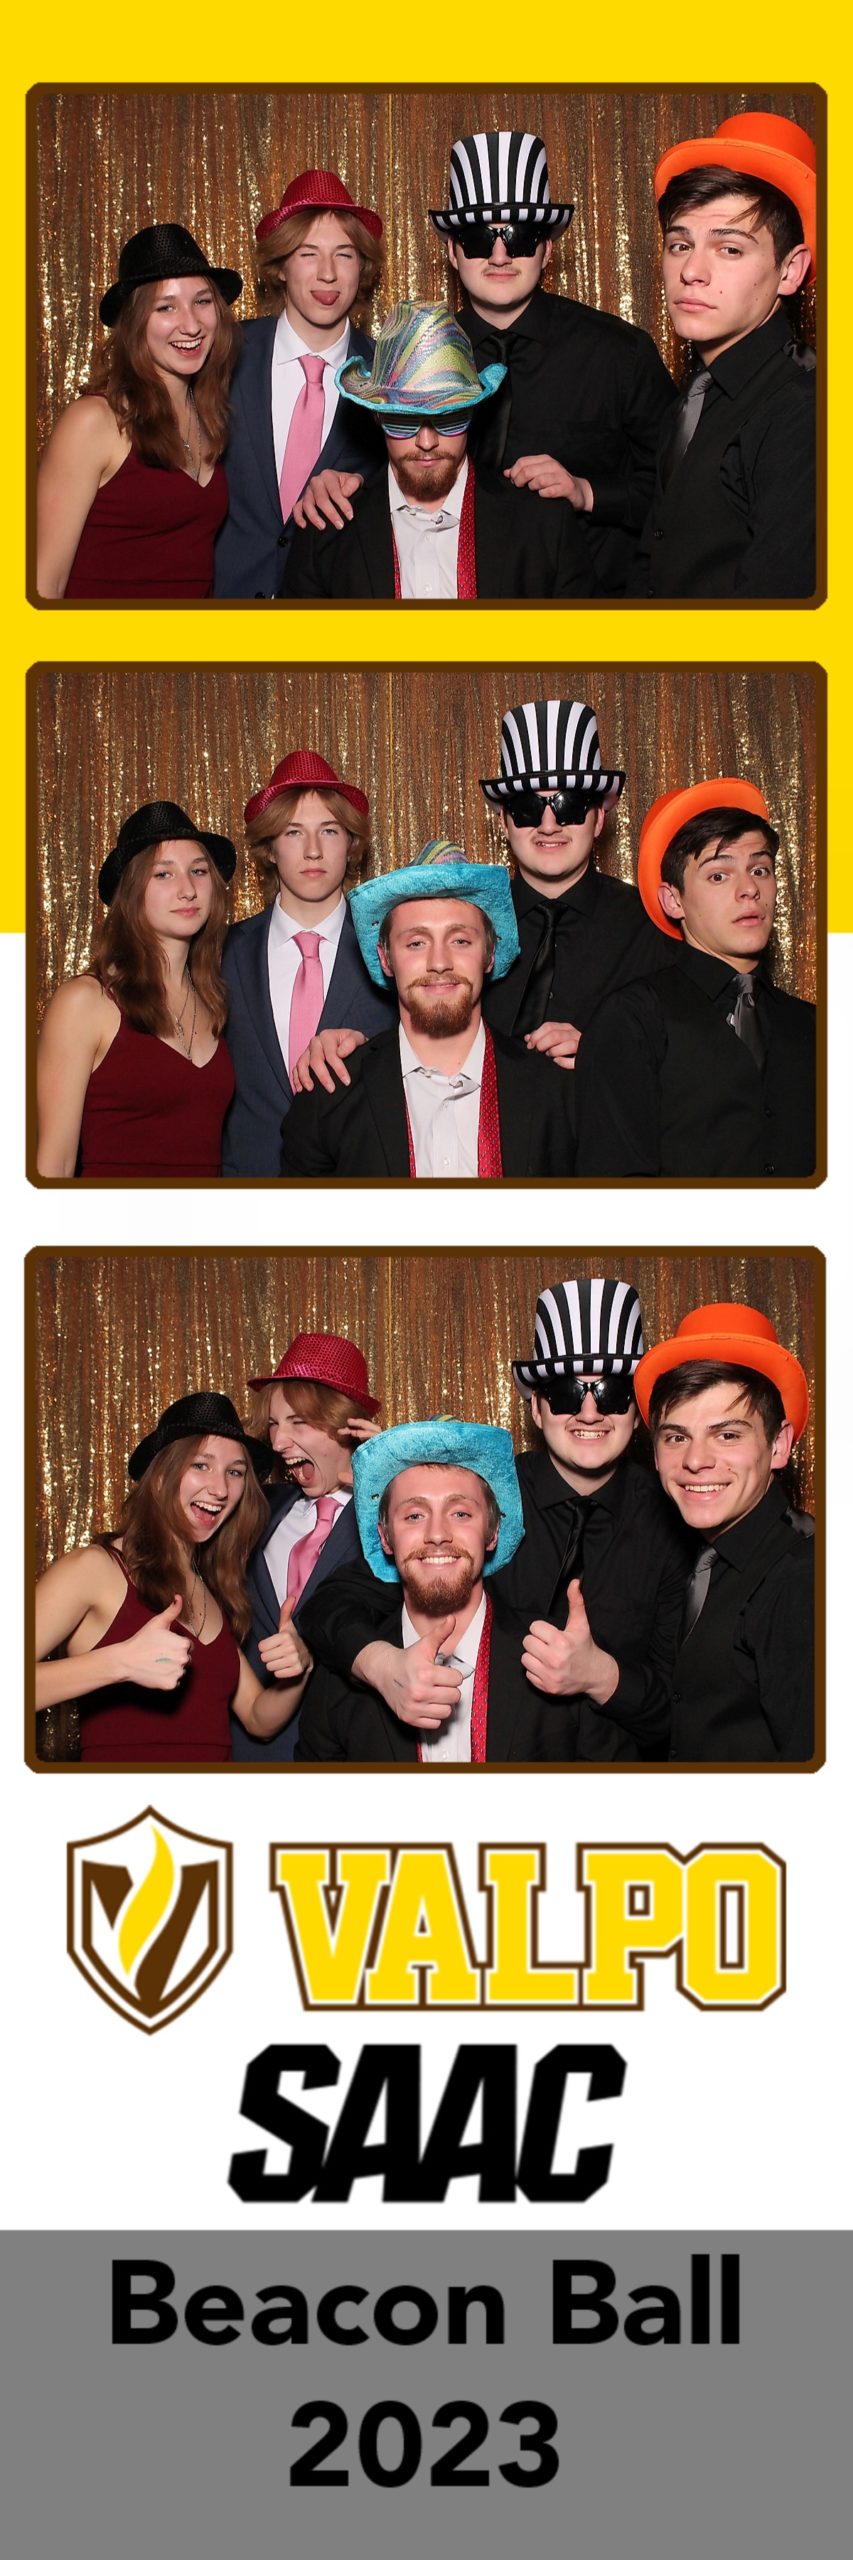 School Event Photo Booth